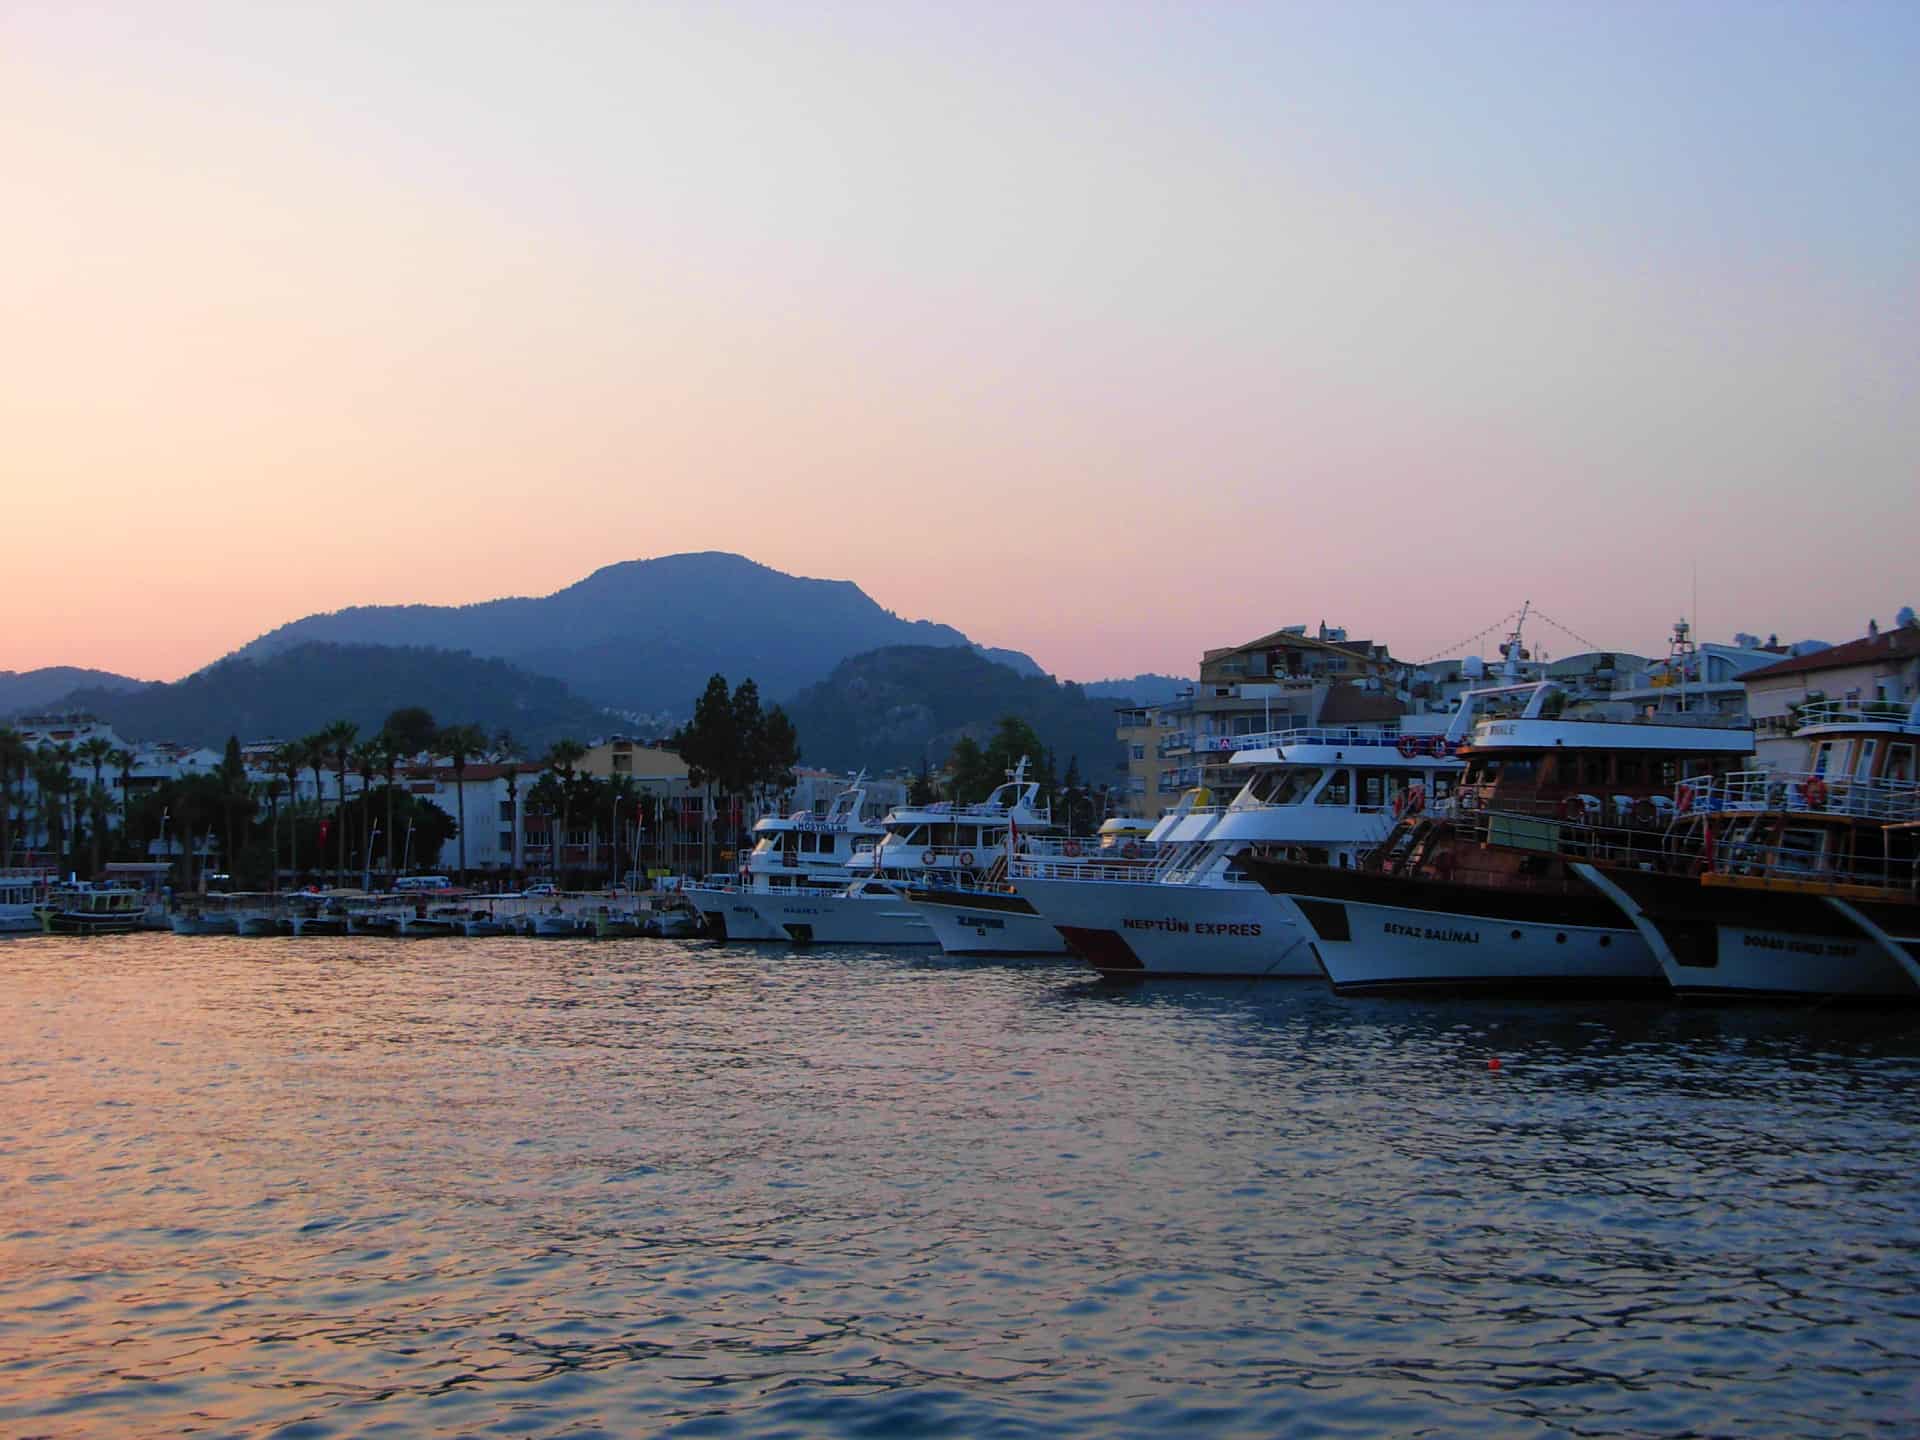 Evening moonlight cruise and dusk over Marmaris: Marmaris Excursions - 7 Very Best Day Trips From Marmaris, Turkey